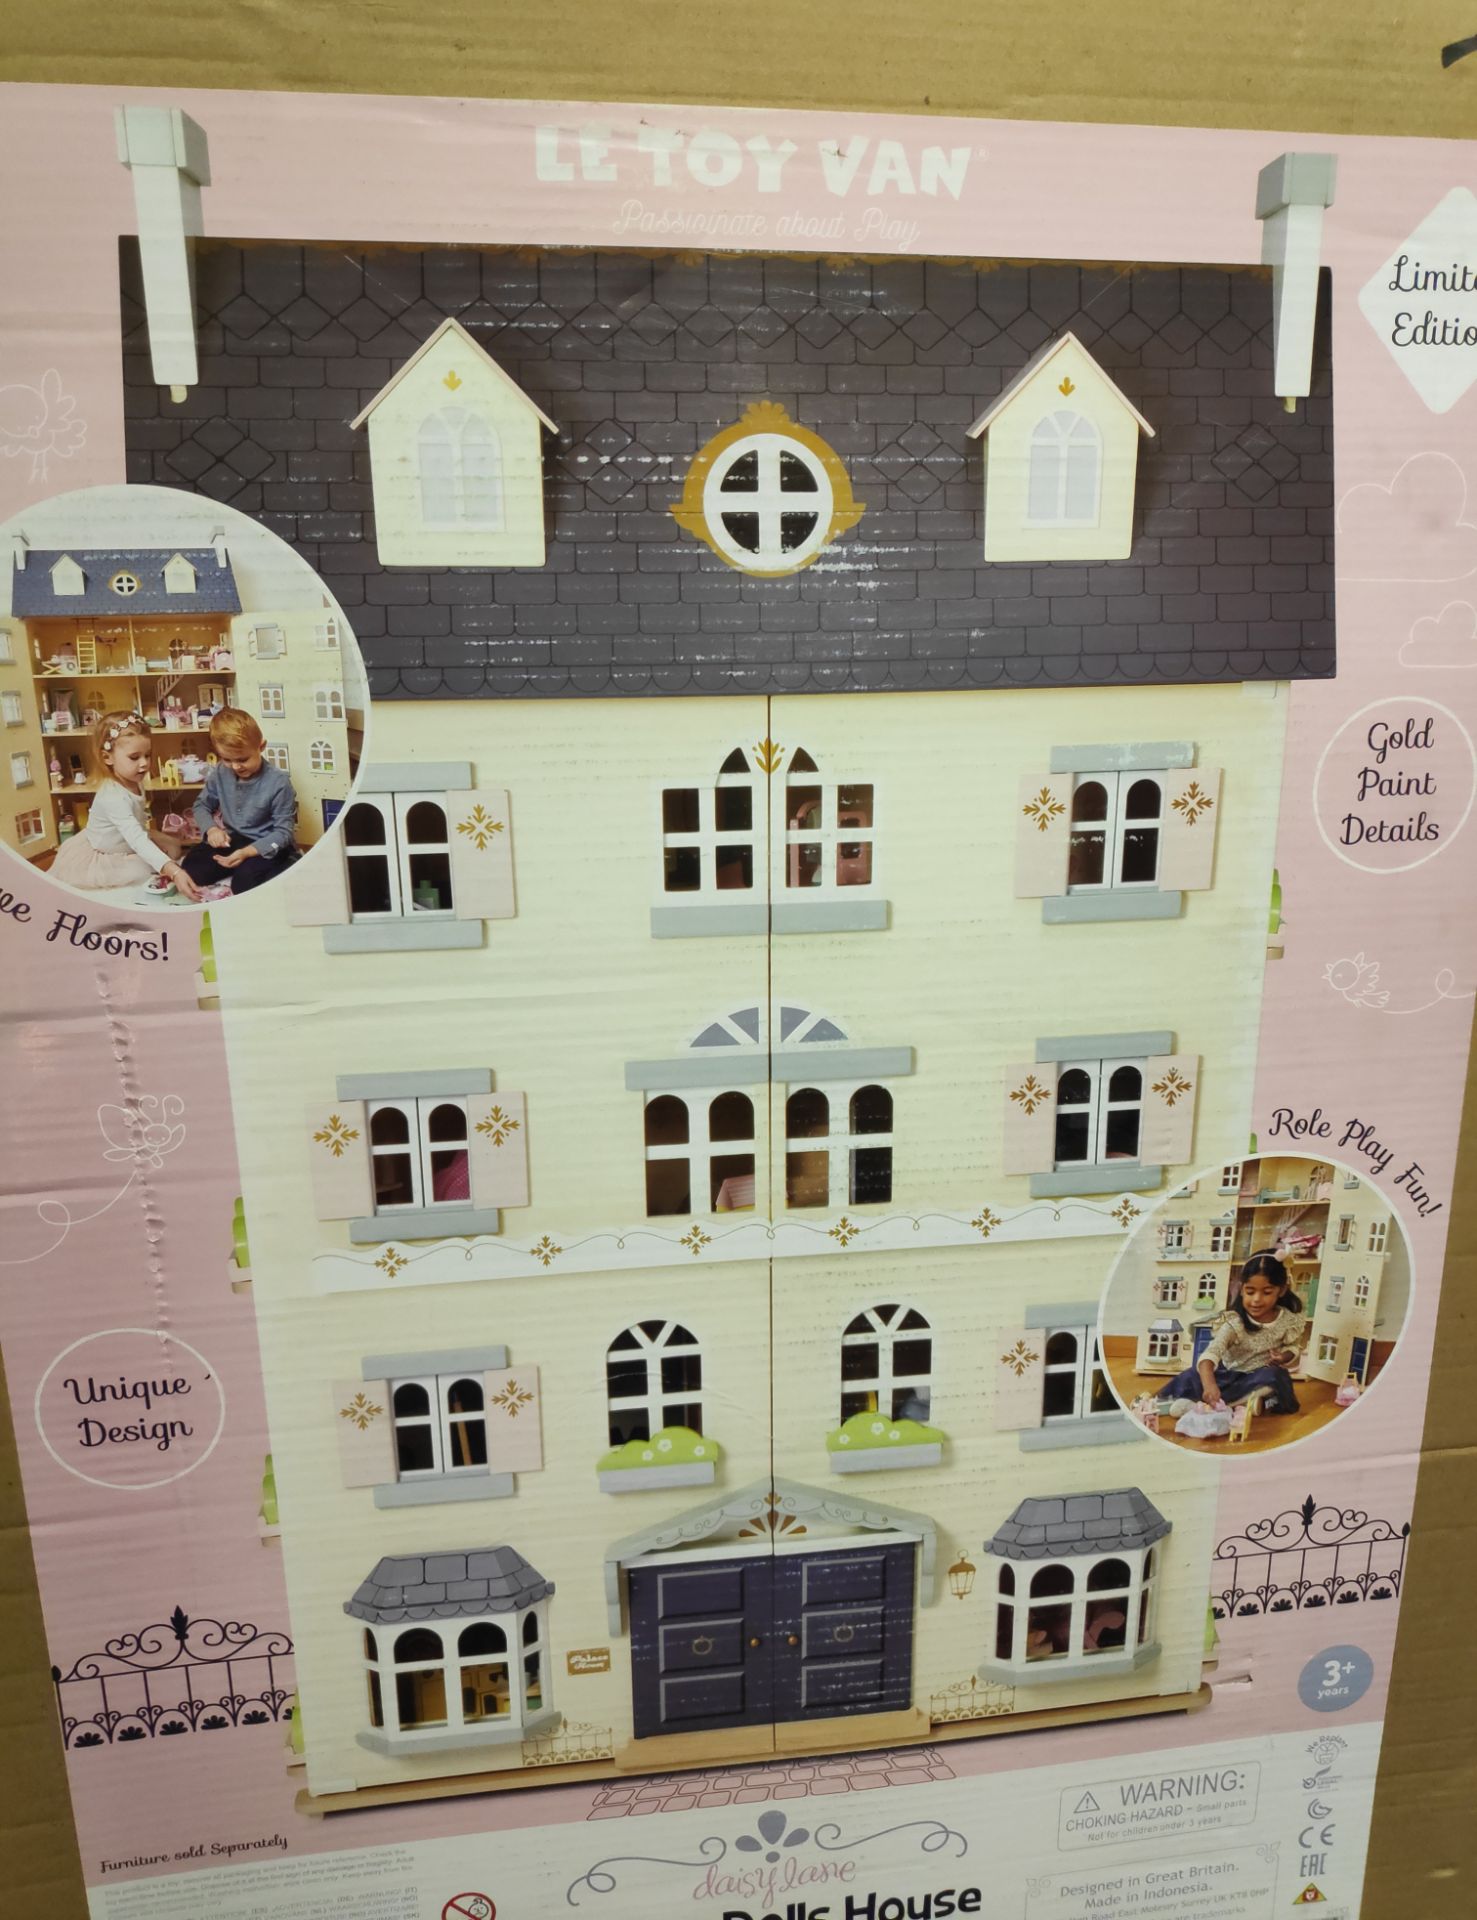 1 x Le Toy Van Wooden Palace Dolls House - New/Boxed - HTYS163 - CL987 - Location: Altrincham WA14 - - Image 5 of 10